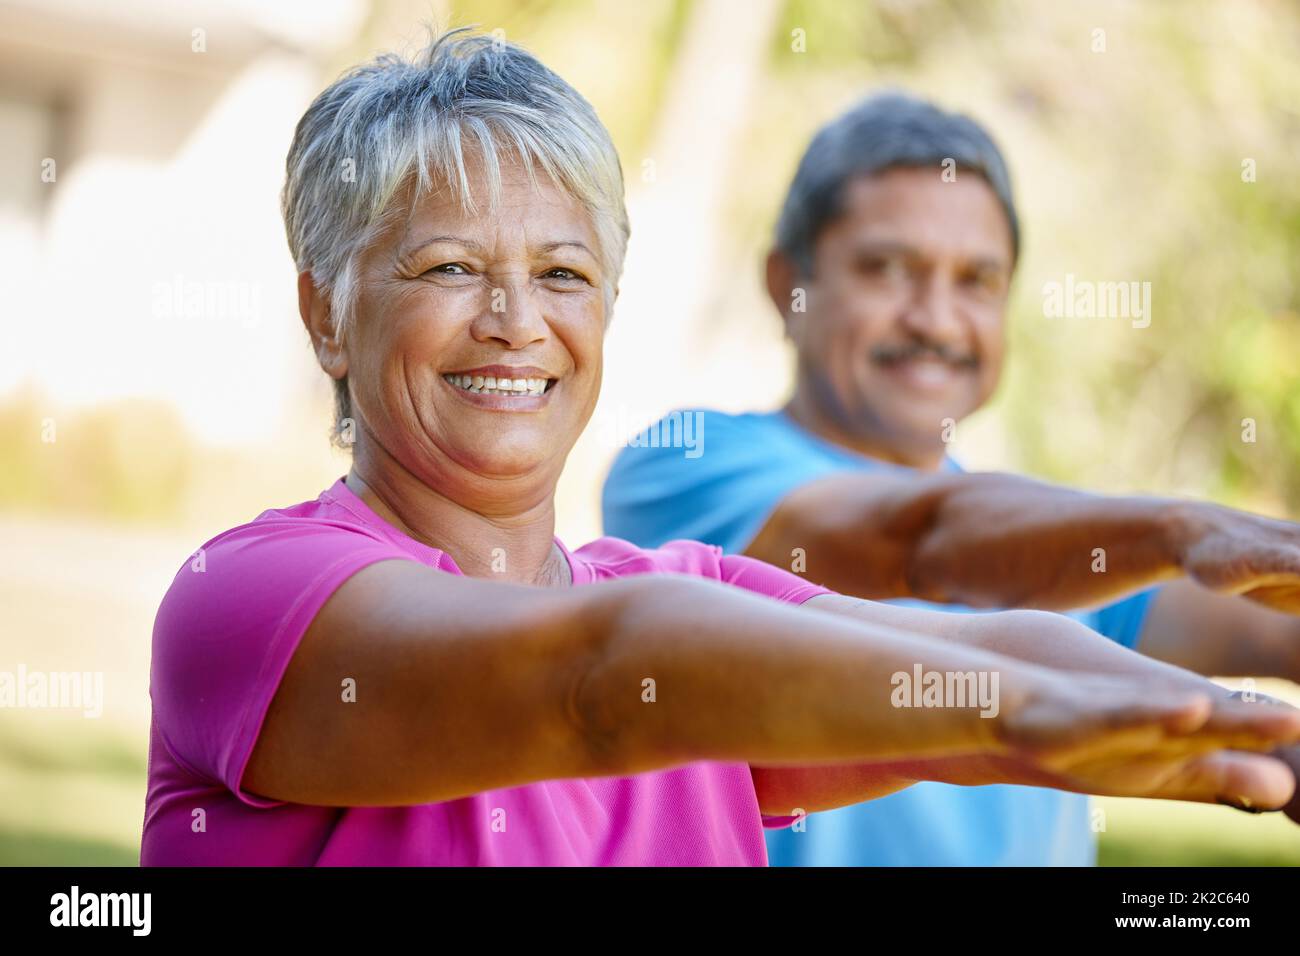 Living life with vitality. Portrait of a mature couple exercising together in their backyard. Stock Photo